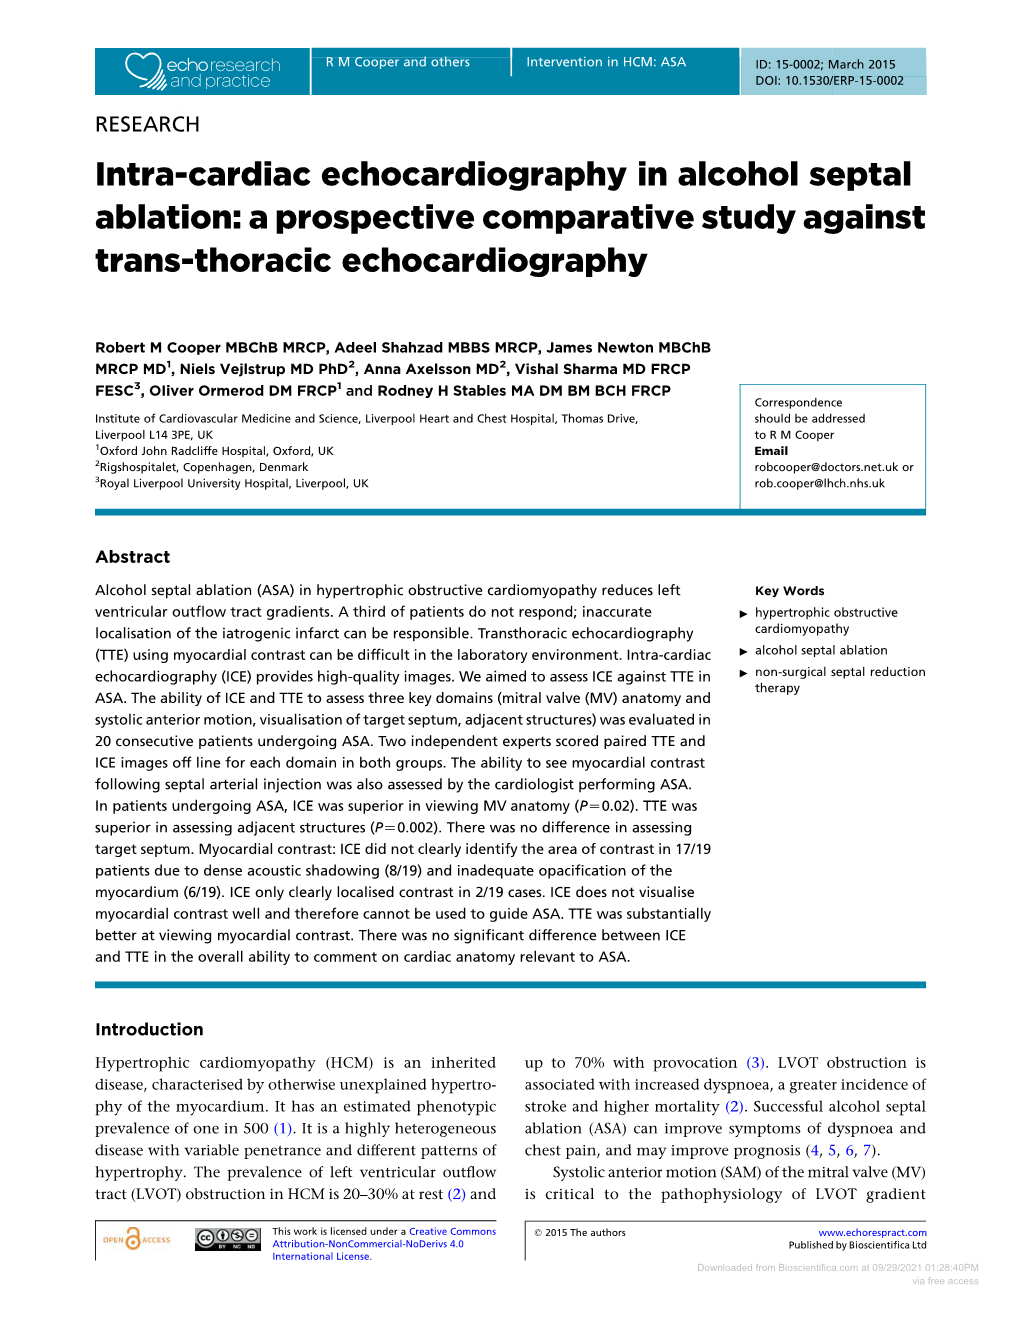 Intra-Cardiac Echocardiography in Alcohol Septal Ablation: a Prospective Comparative Study Against Trans-Thoracic Echocardiography